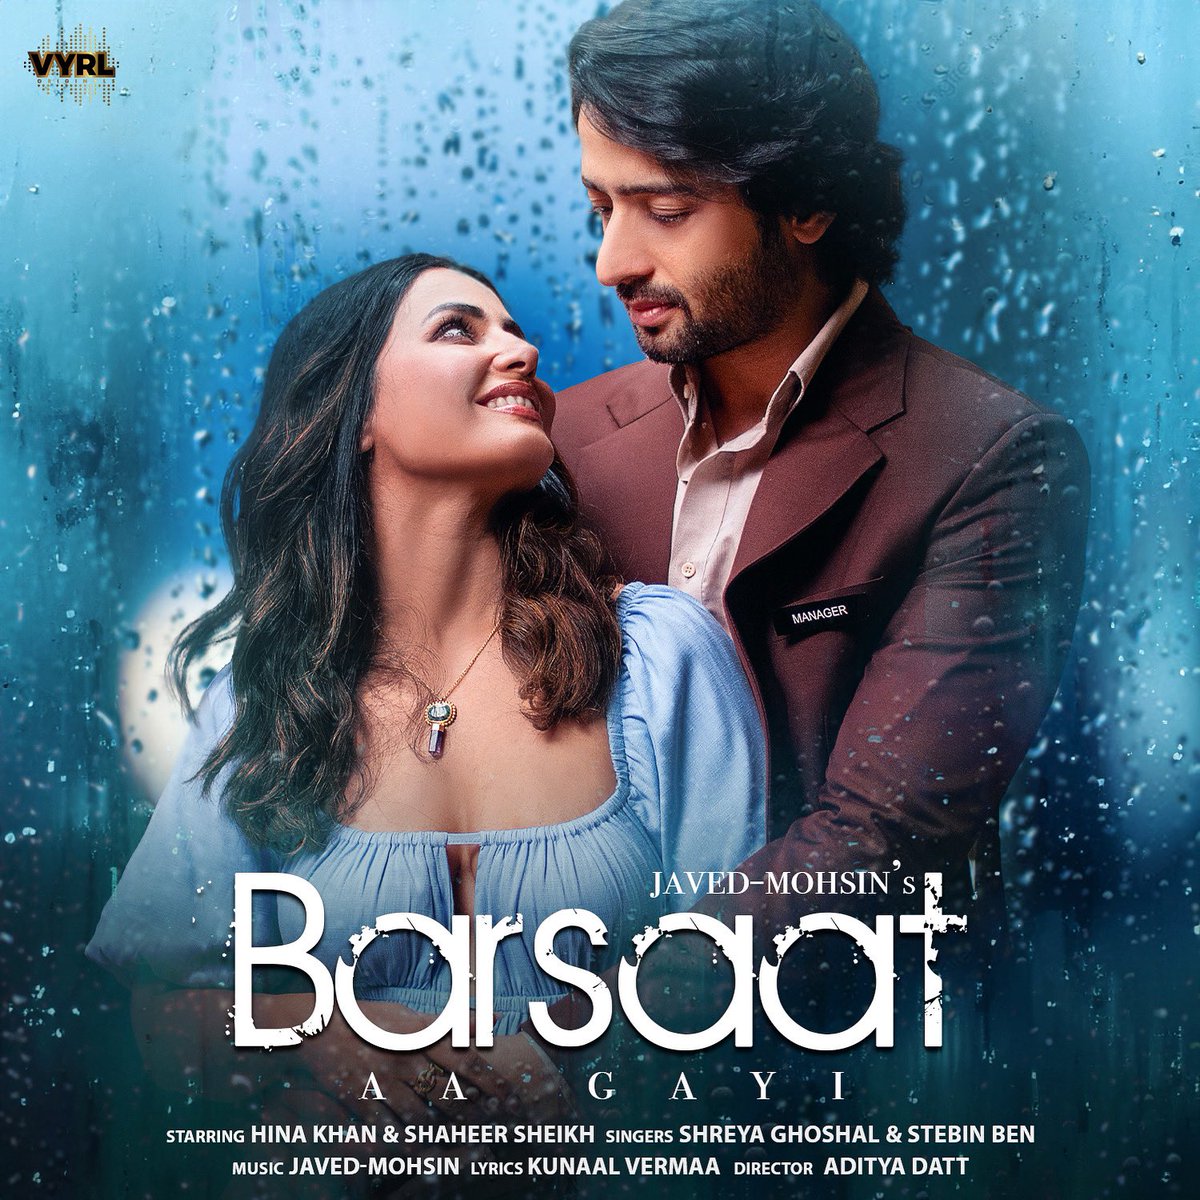 The Monsoon Melody you have been waiting for . 🌧️❤️ #BarsaatAaGayi out on 14th June on the @vyrloriginals Youtube channel. #LoveSong #RainLover #NewSongAlert @shaheernsheikh @realhinakhan @javedmohsin_official @shreyaghoshal @stebinben @kunaalvermaa #shreyaghoshal #stebinbe